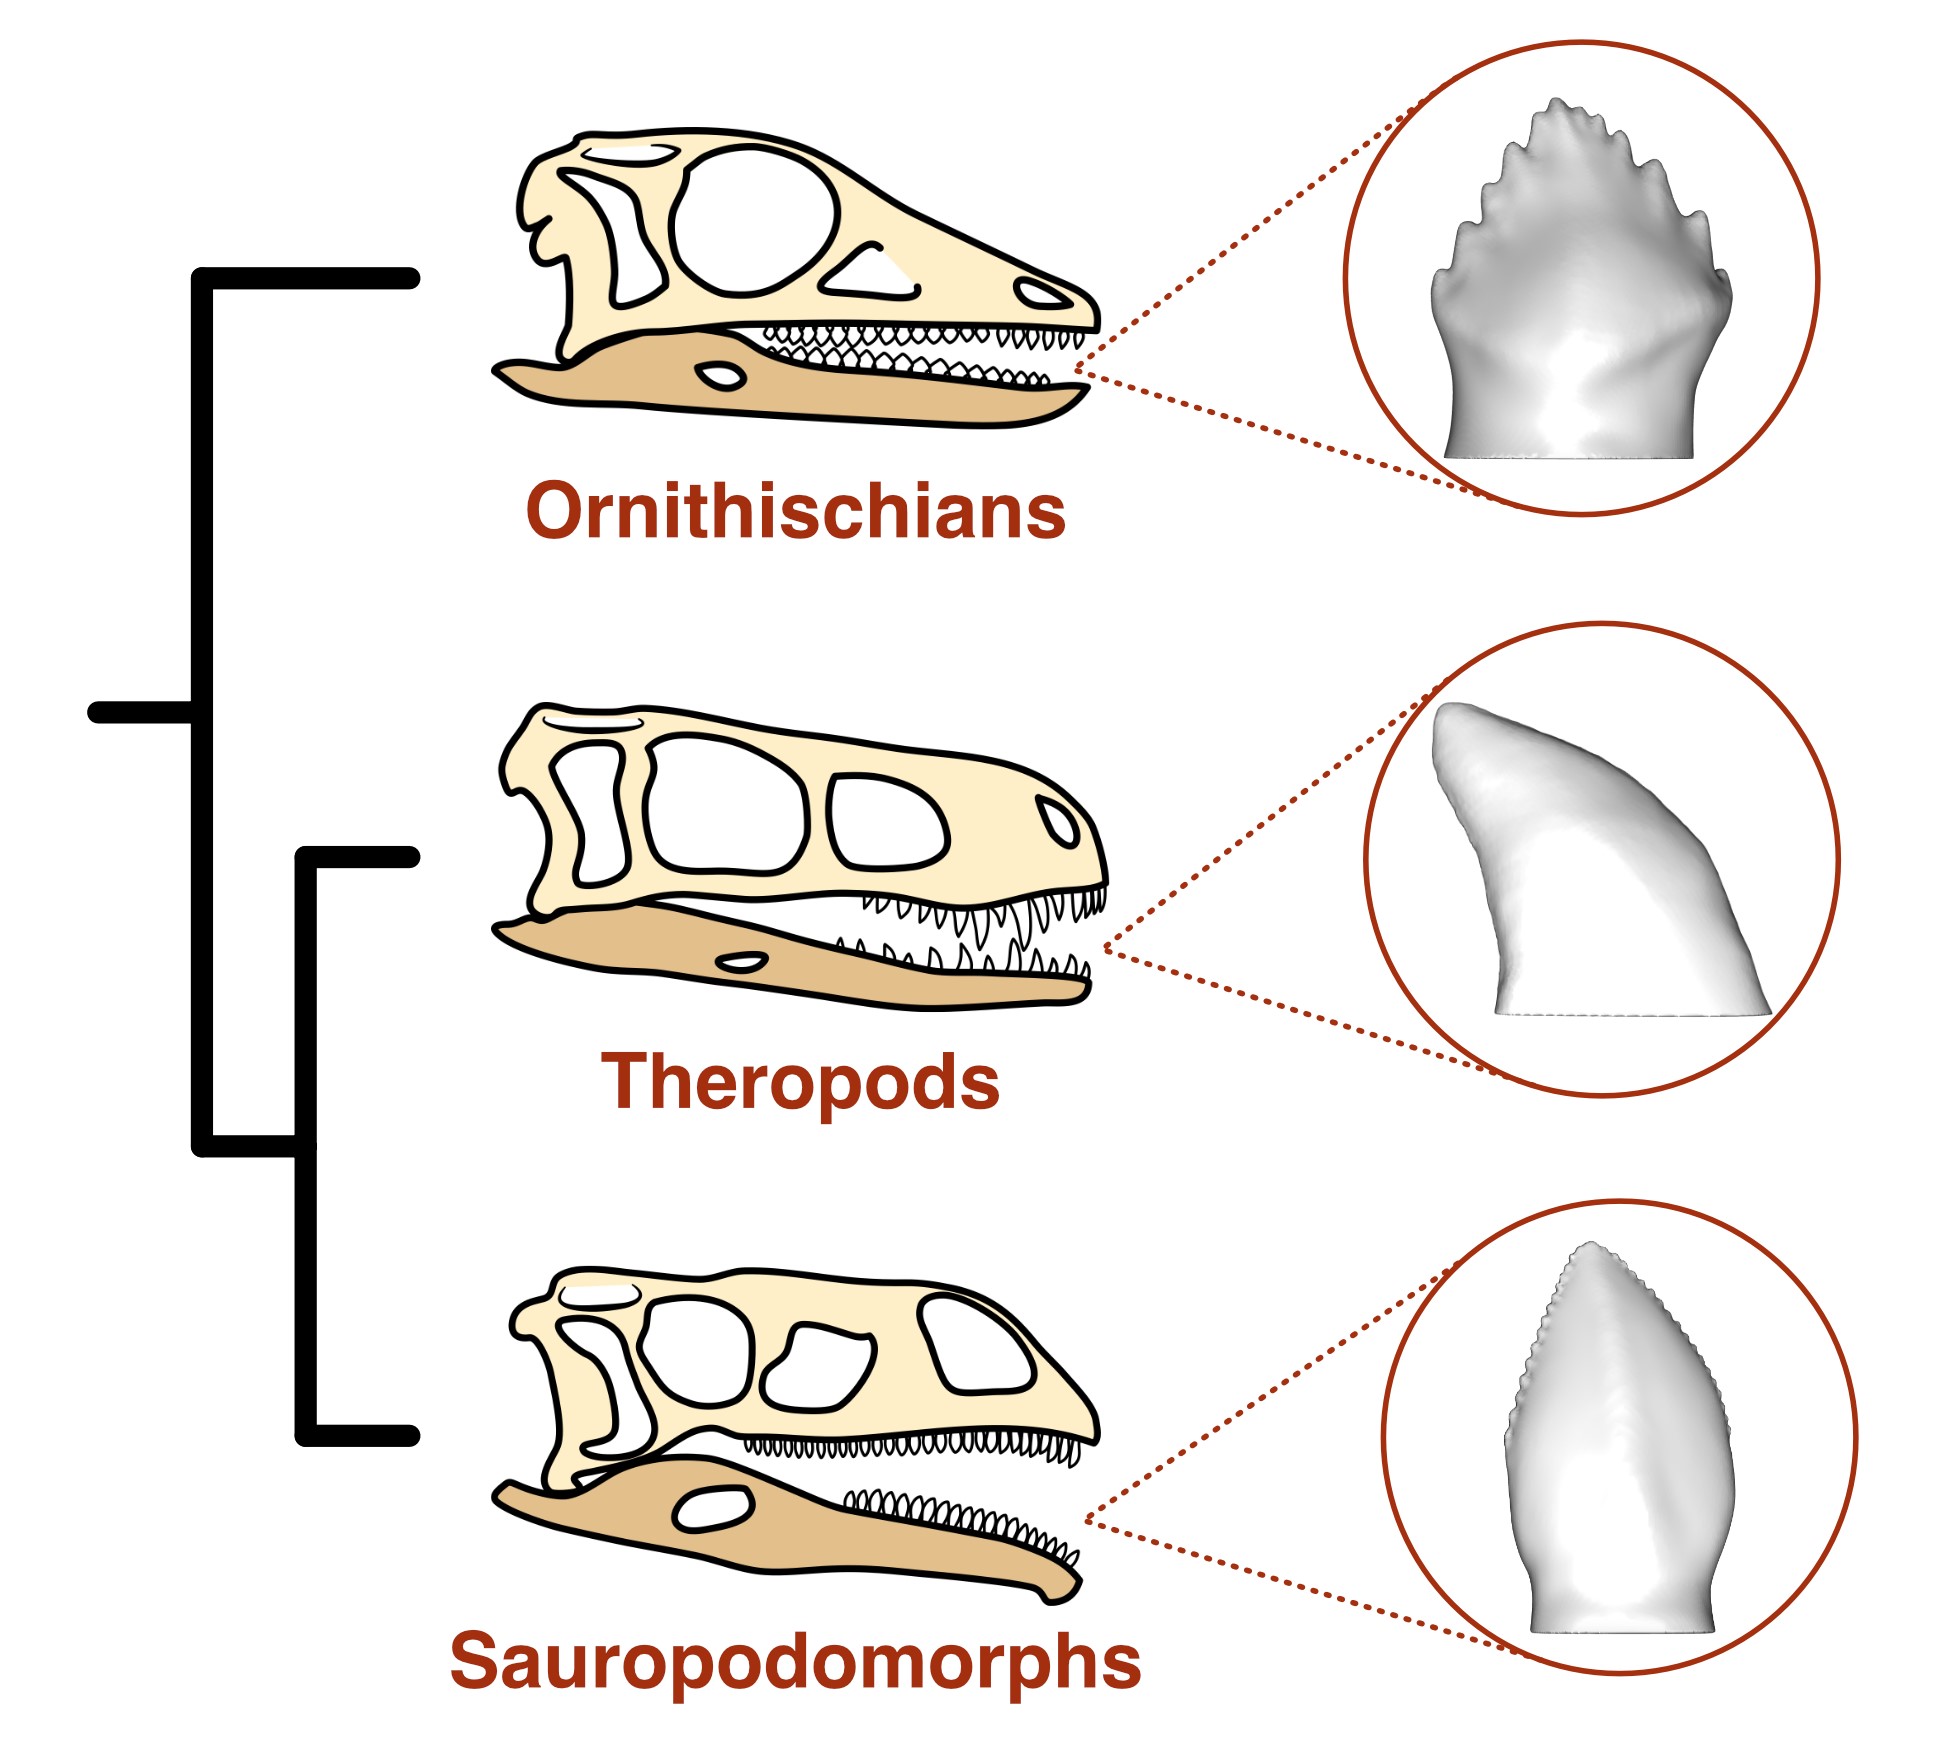 The three main dinosaur lineages and their typical tooth shapes